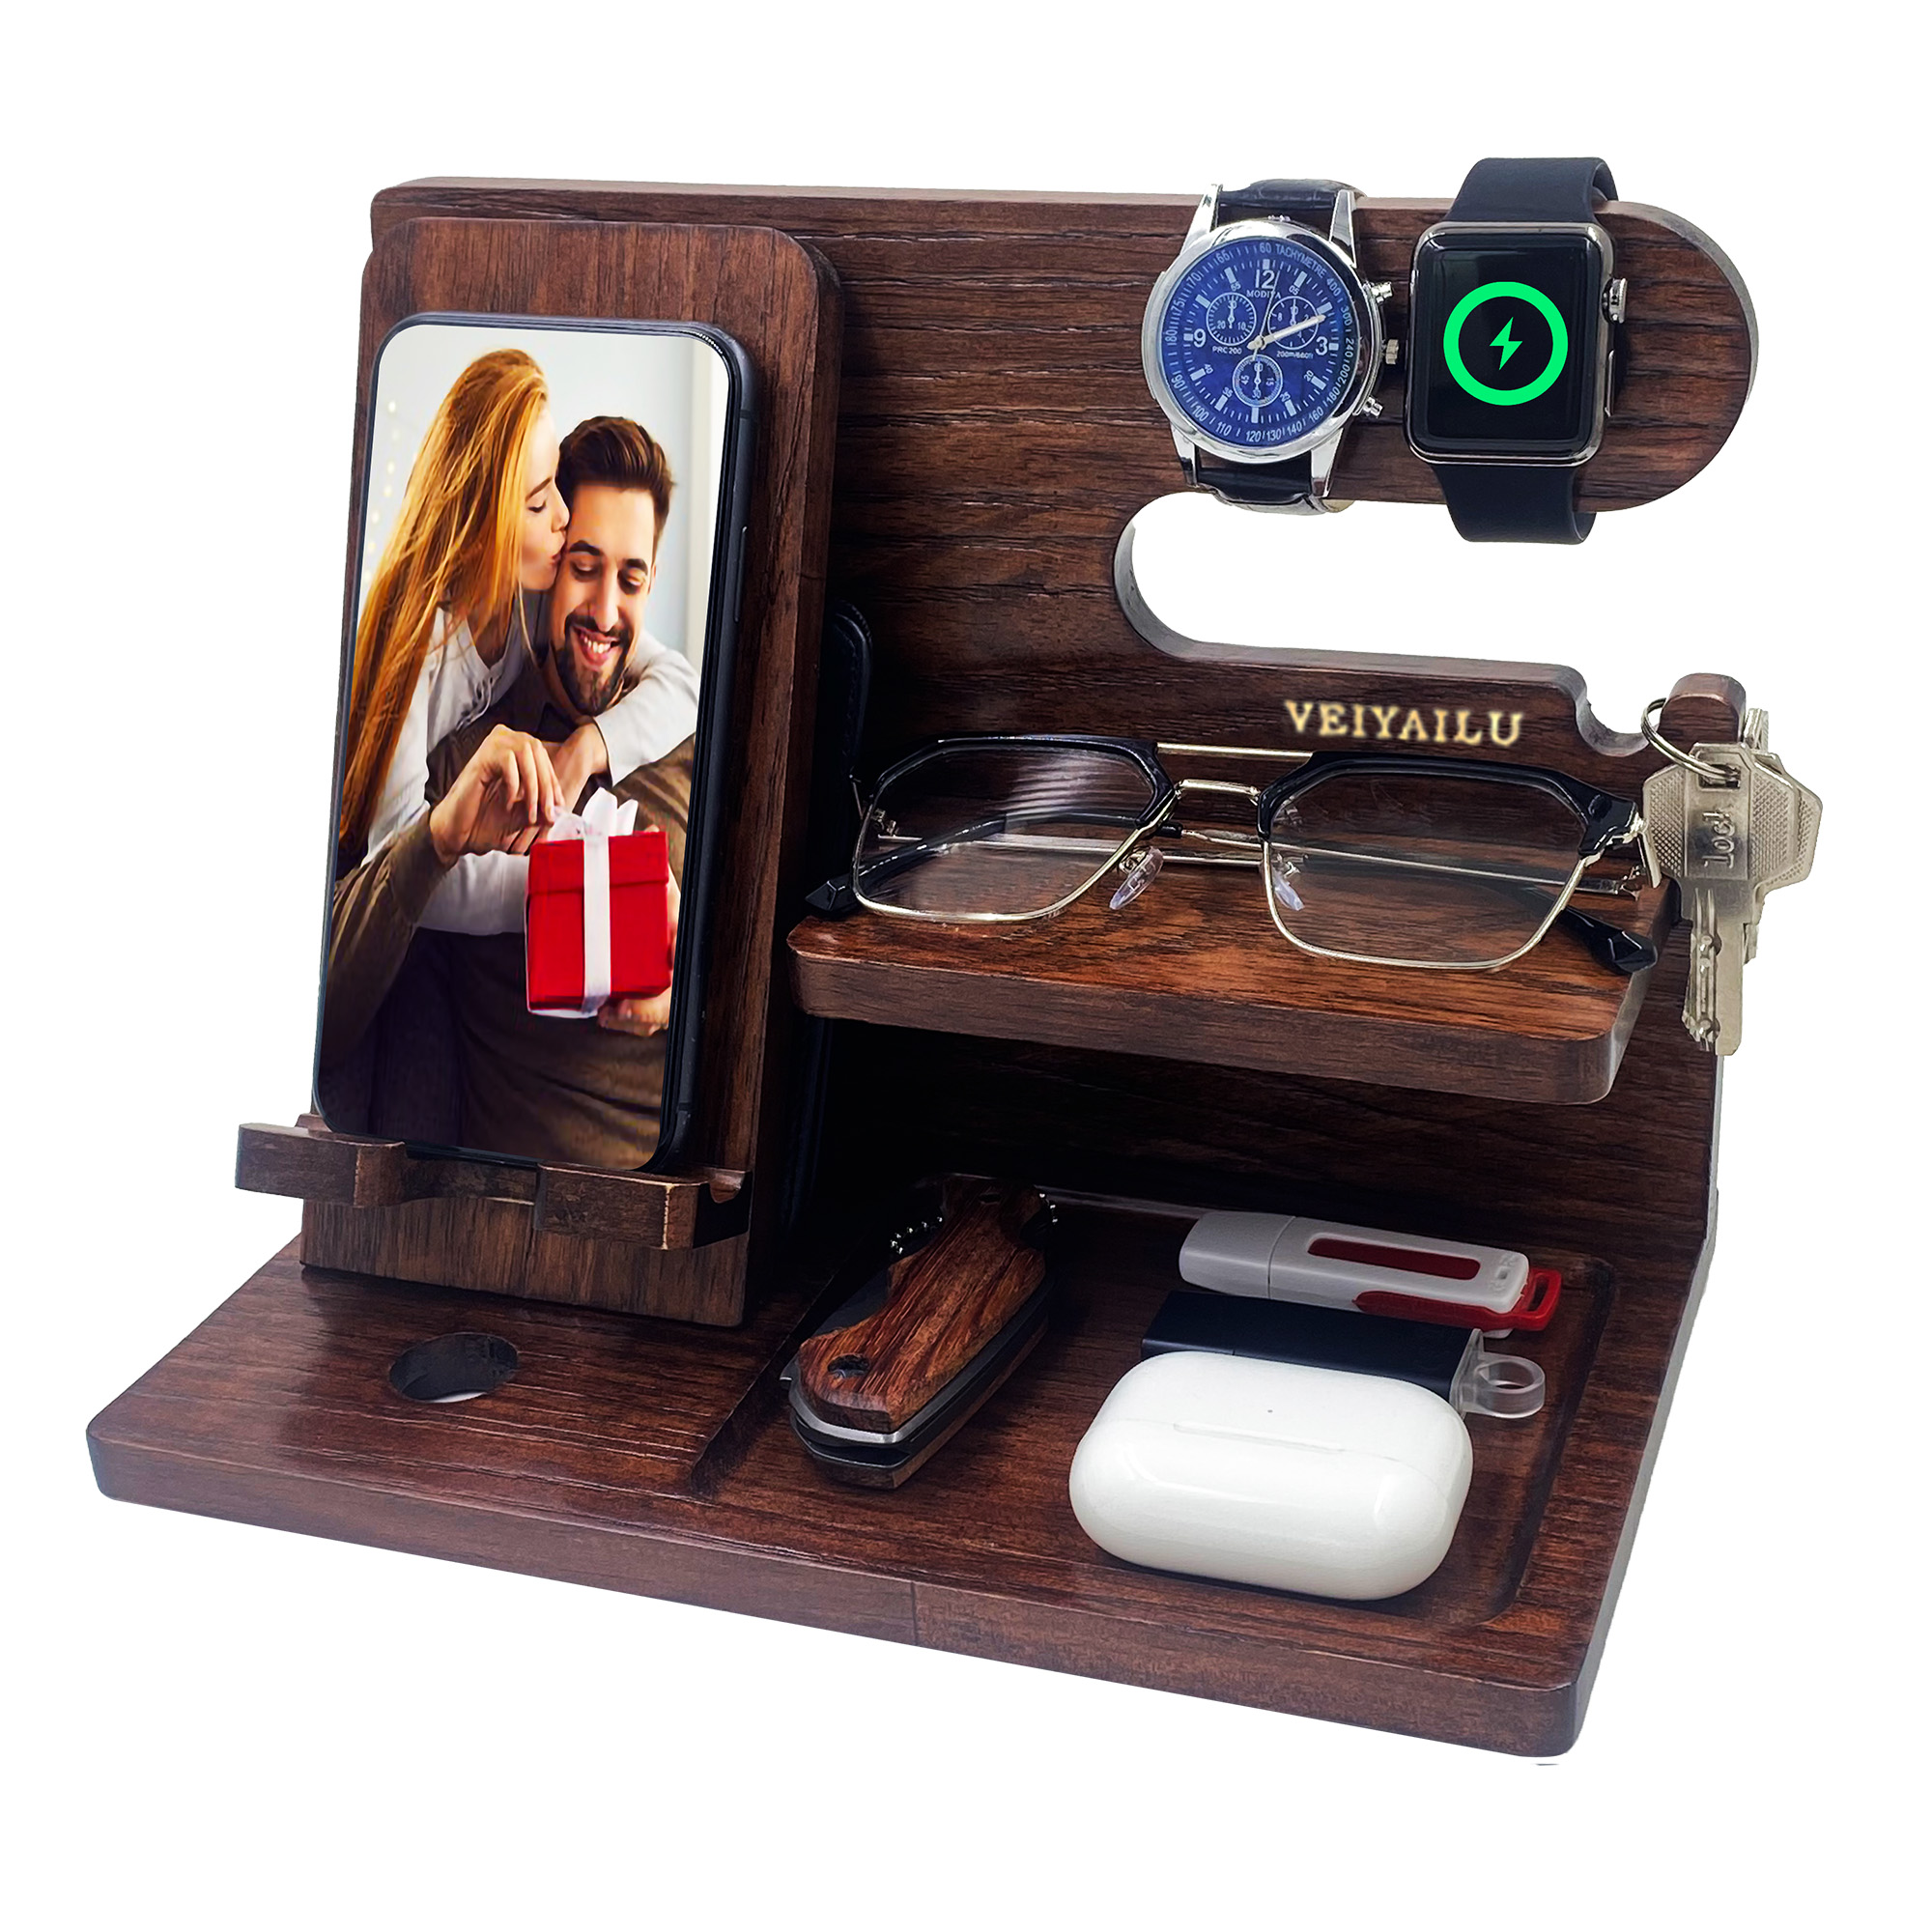 VEIYAILU Gifts for Brother BOSS Boyfriend Him Men,Nightstand Organizer for Men, Gifts for Dad from Daughter Son Wife - Gifts Ideas for Father's Day, Christmas, and Valentine's Day (Dark Brown)